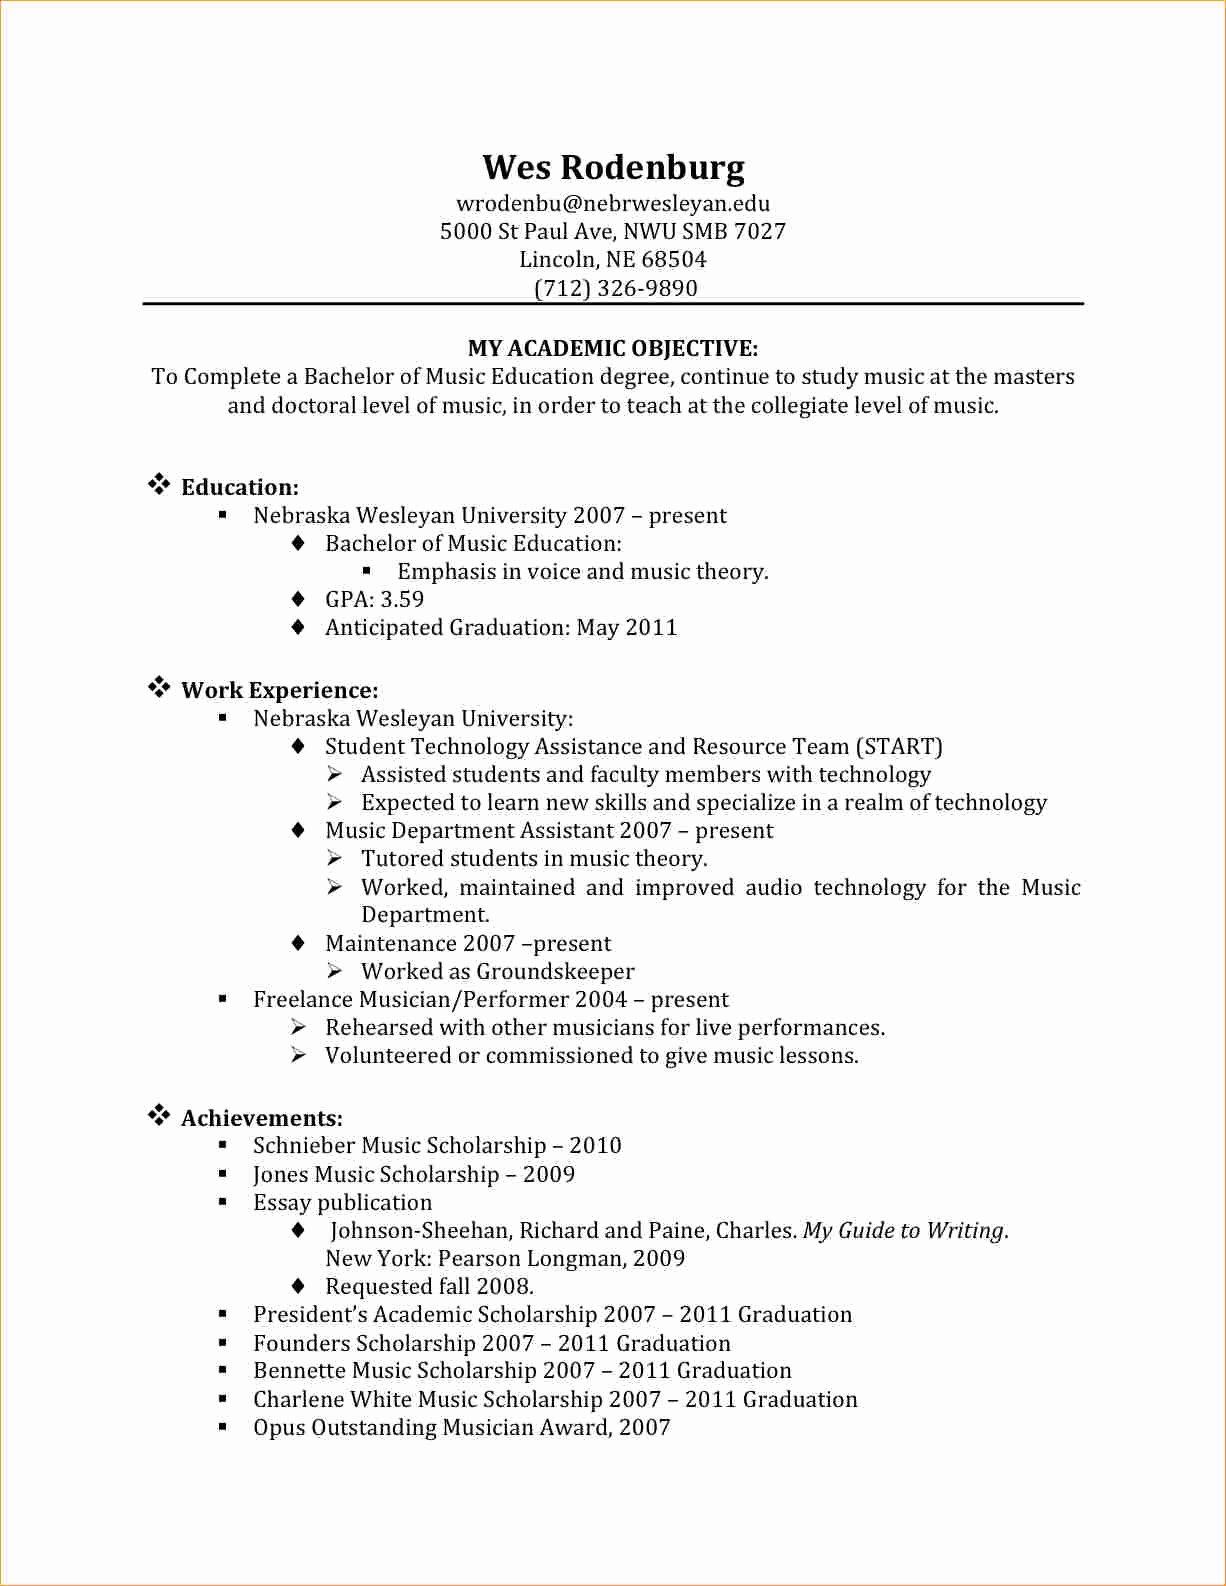 Ac Plishments In Resume Business Proposal Templated